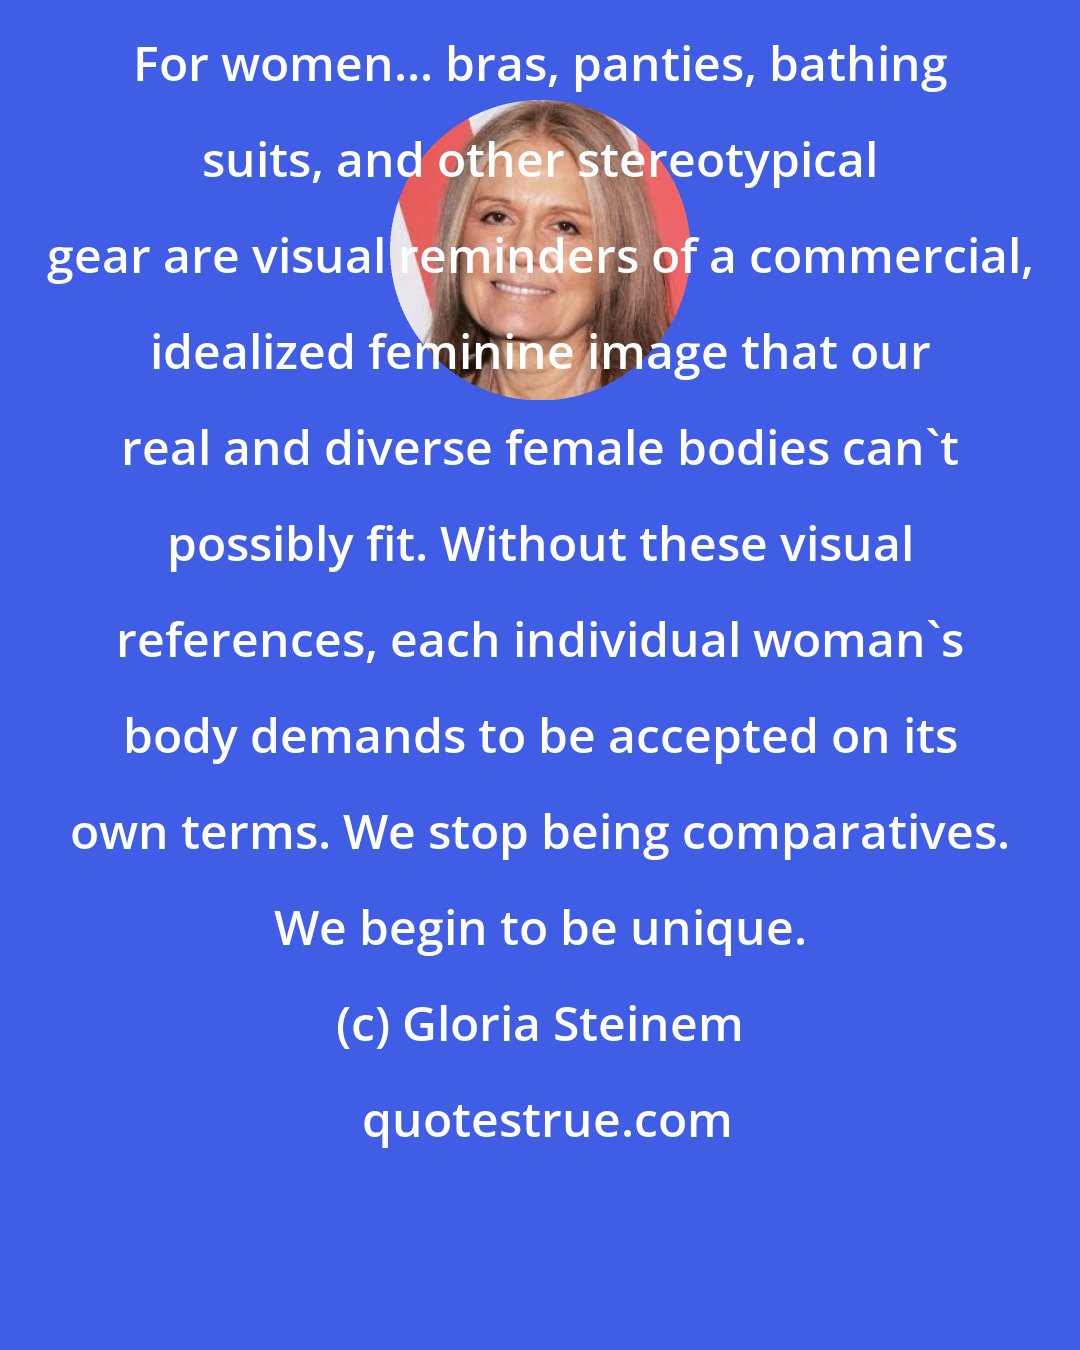 Gloria Steinem: For women... bras, panties, bathing suits, and other stereotypical gear are visual reminders of a commercial, idealized feminine image that our real and diverse female bodies can't possibly fit. Without these visual references, each individual woman's body demands to be accepted on its own terms. We stop being comparatives. We begin to be unique.